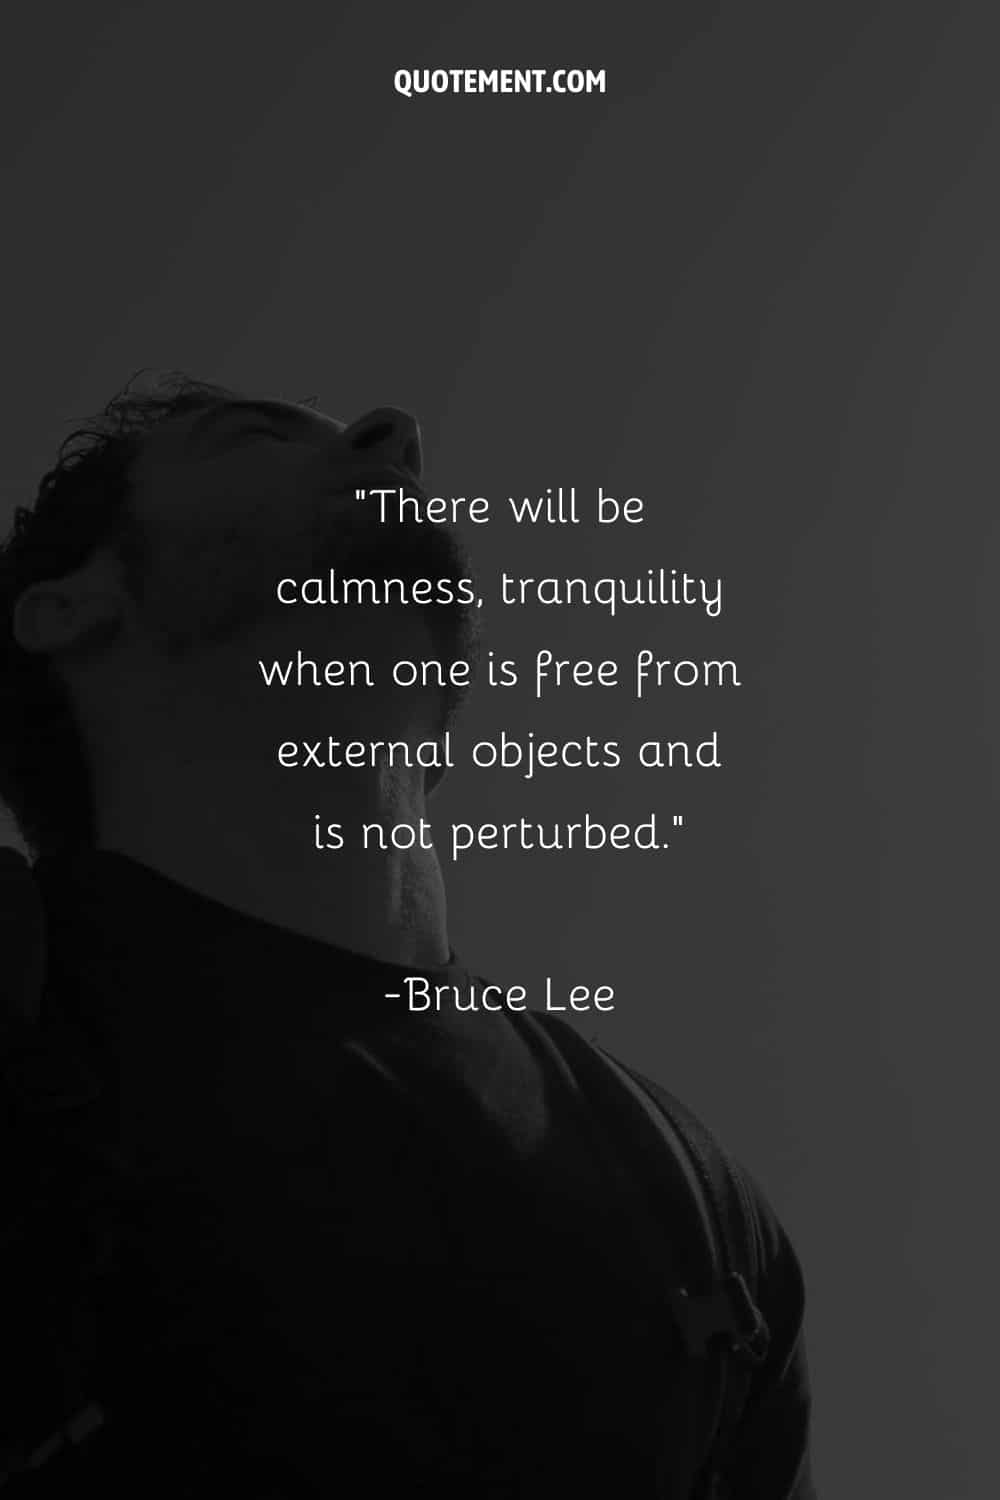 Image of a man peacefully resting representing a quote about calmness.